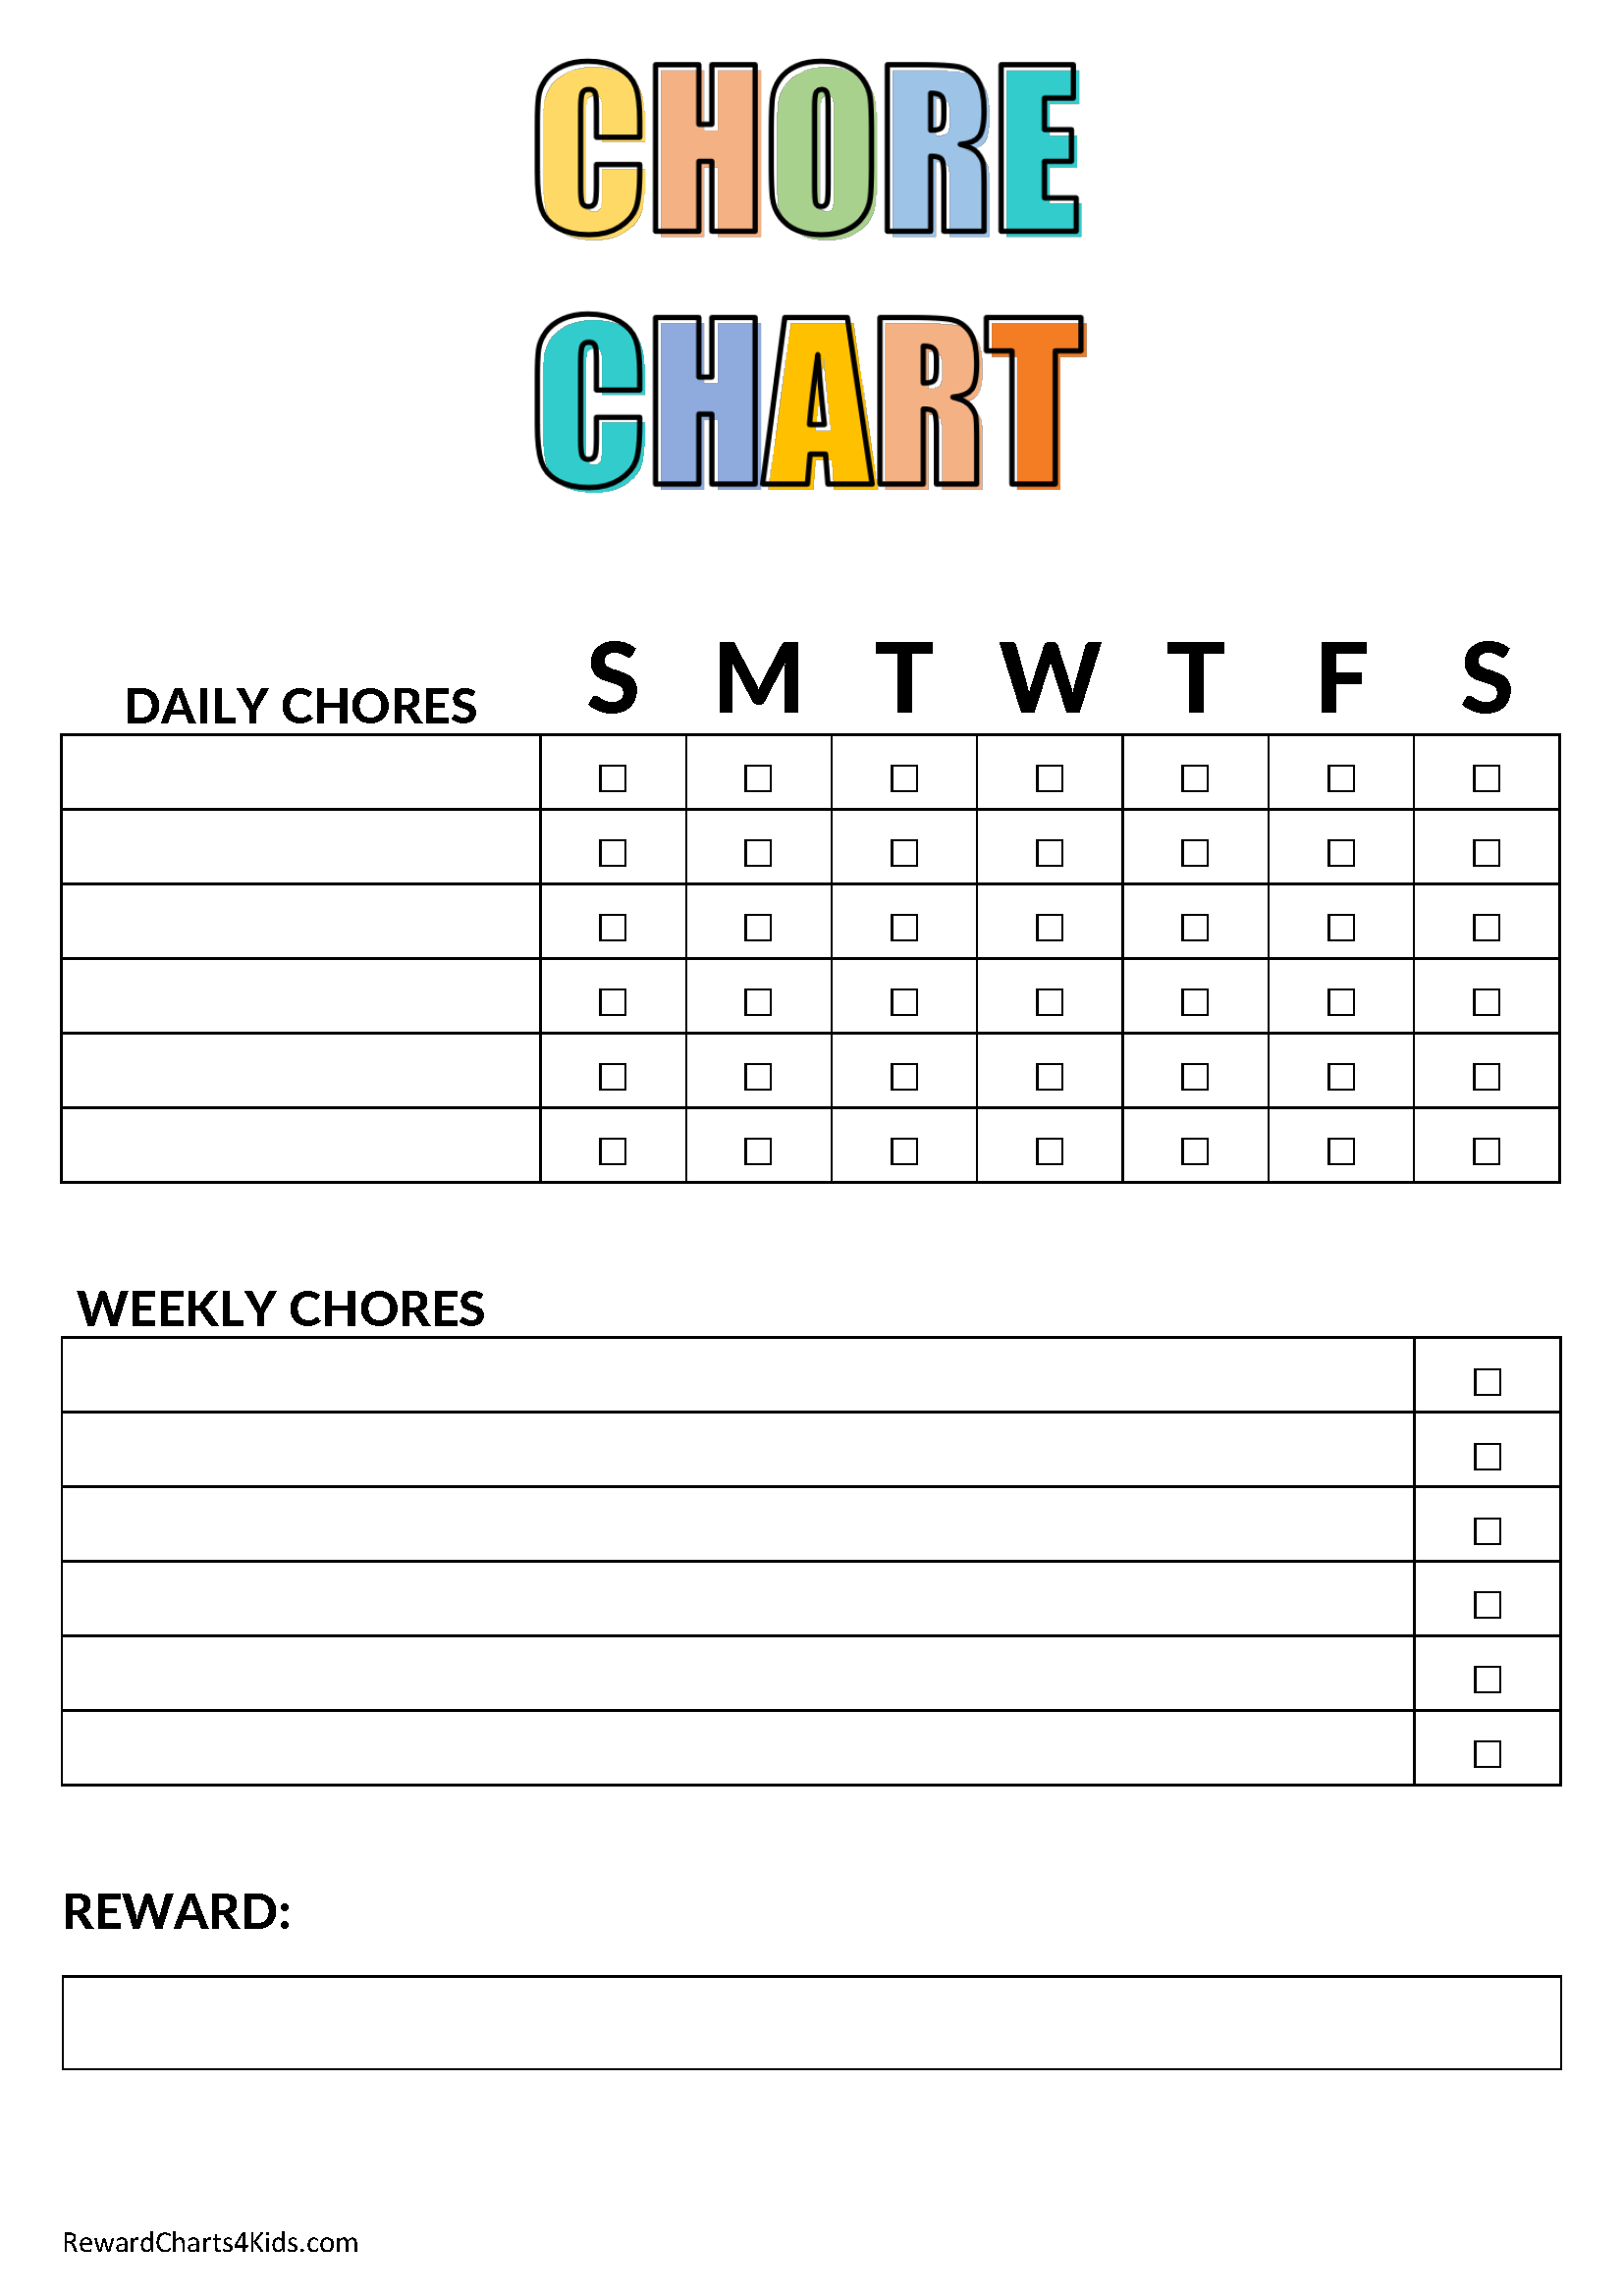 Chores For 10 Year Olds Chore List Free Chore Charts - Free Printable Chore List